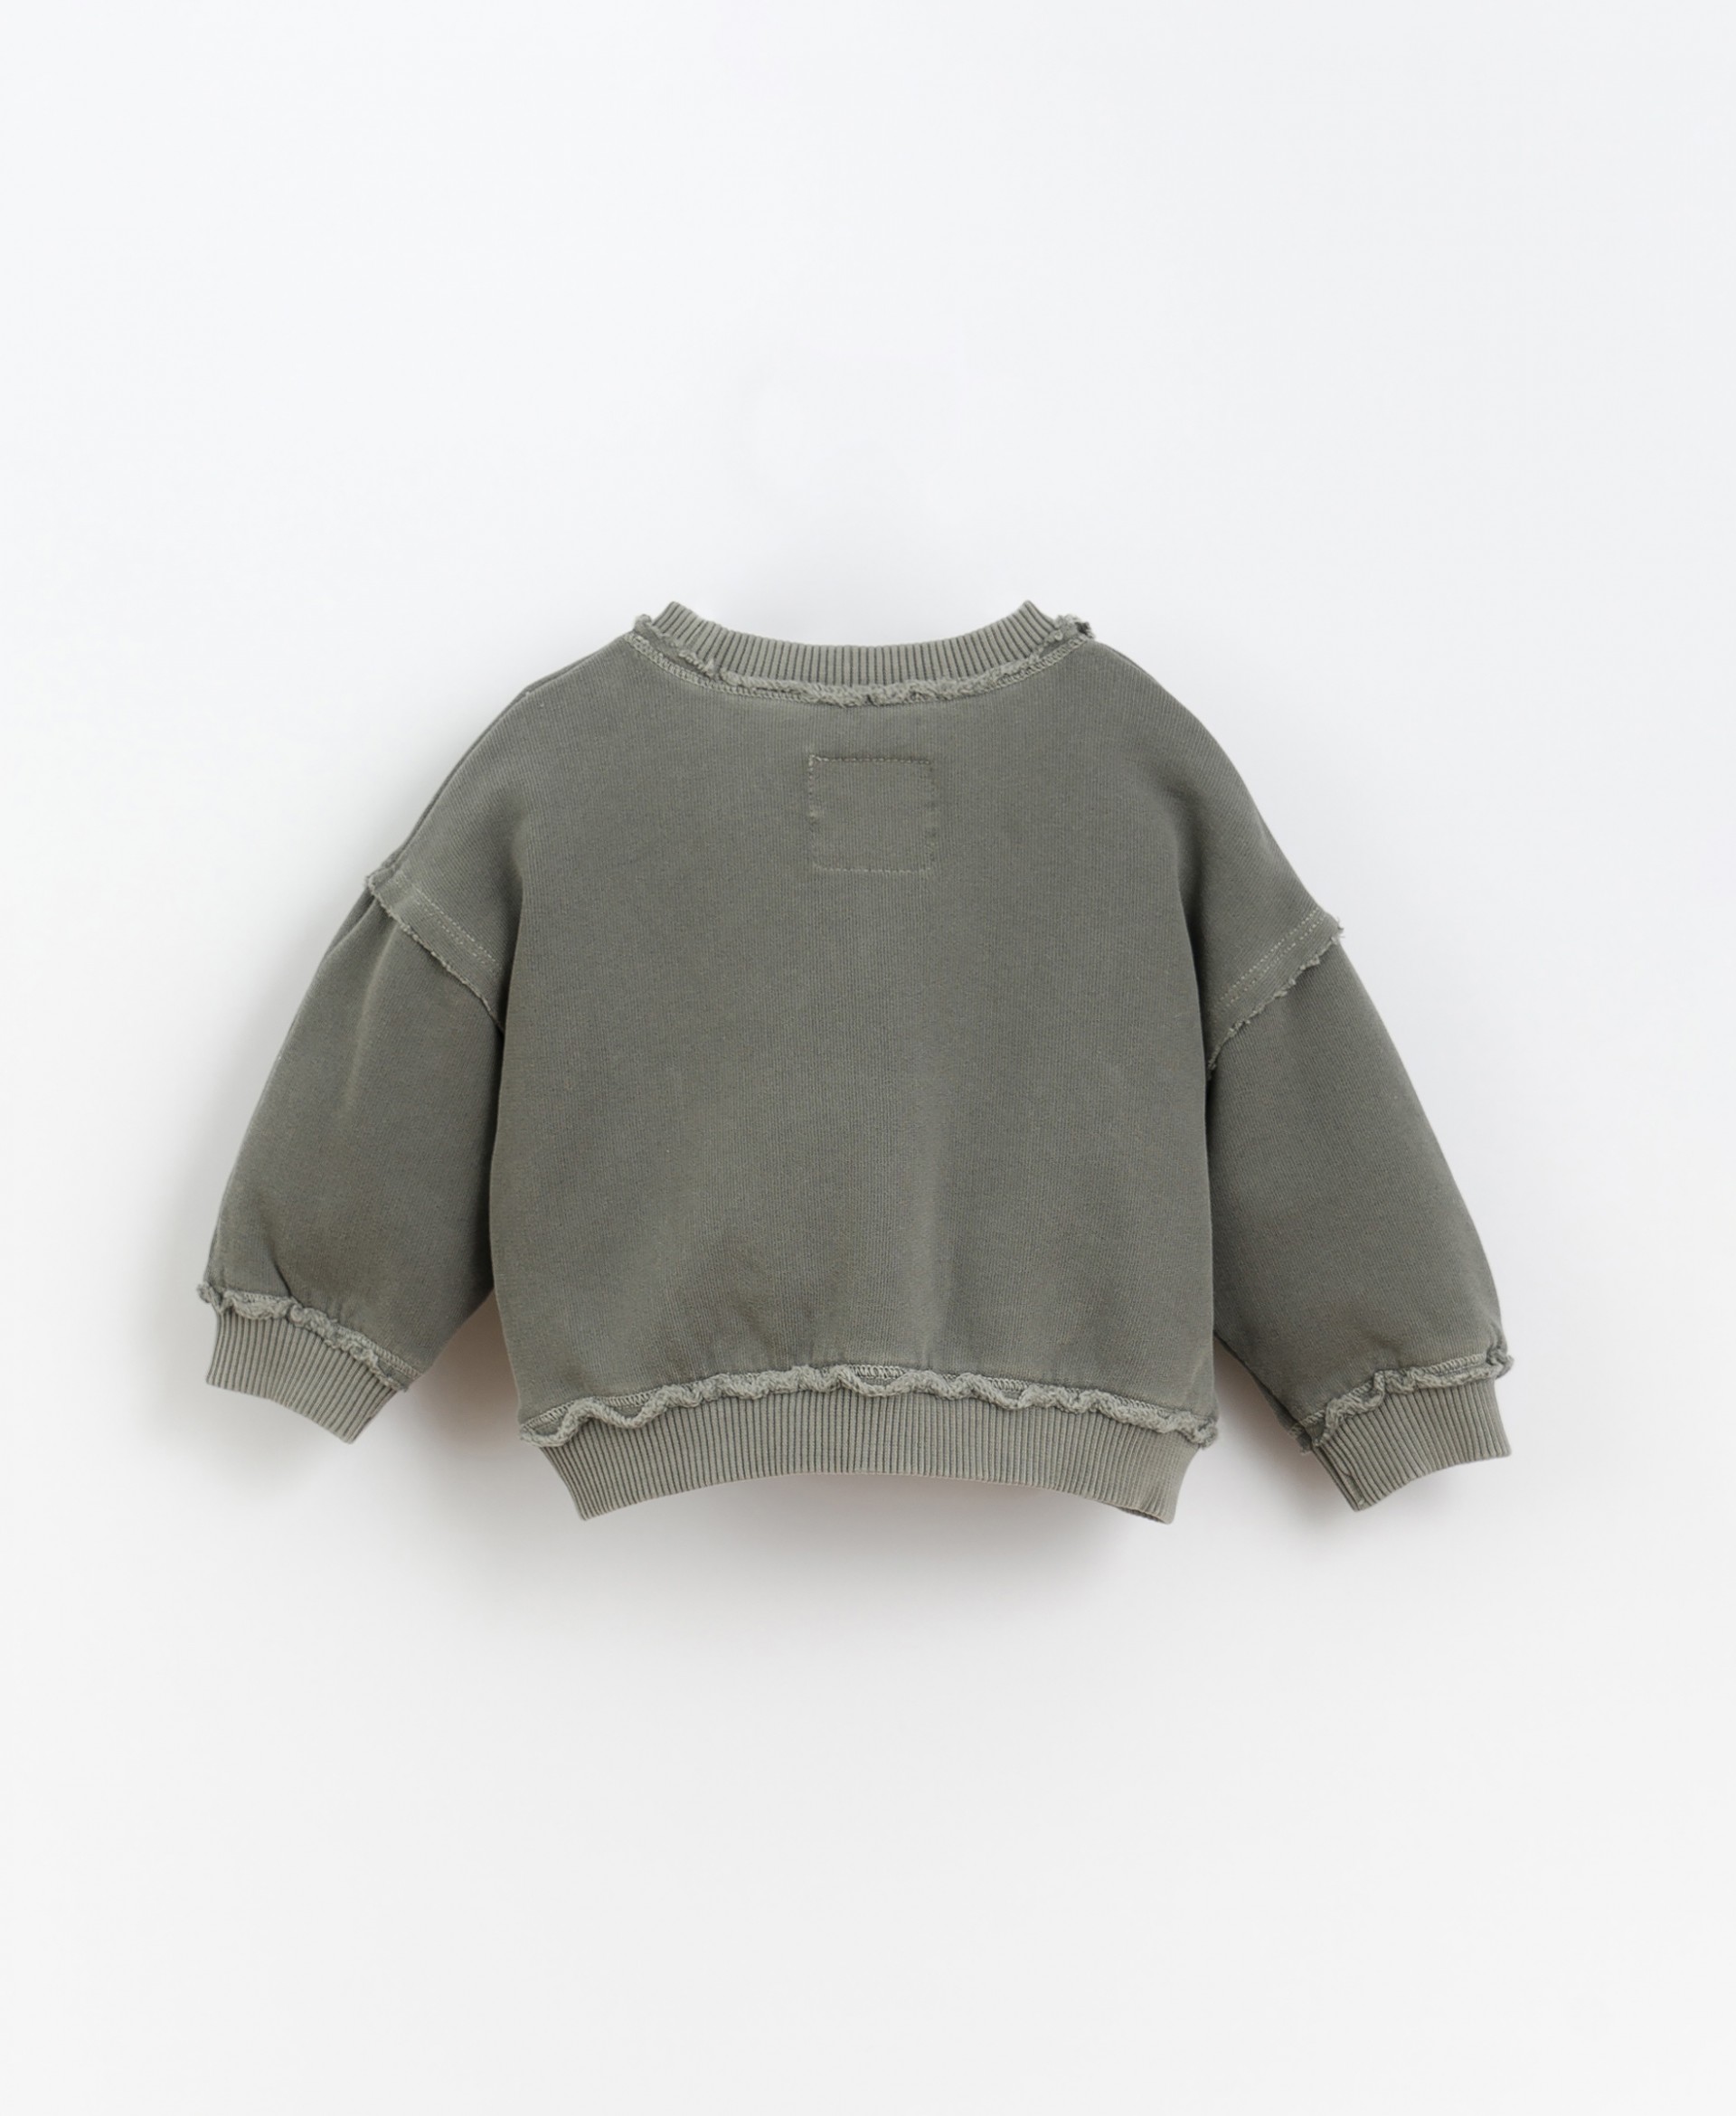 Naturally dyed jersey | Culinary